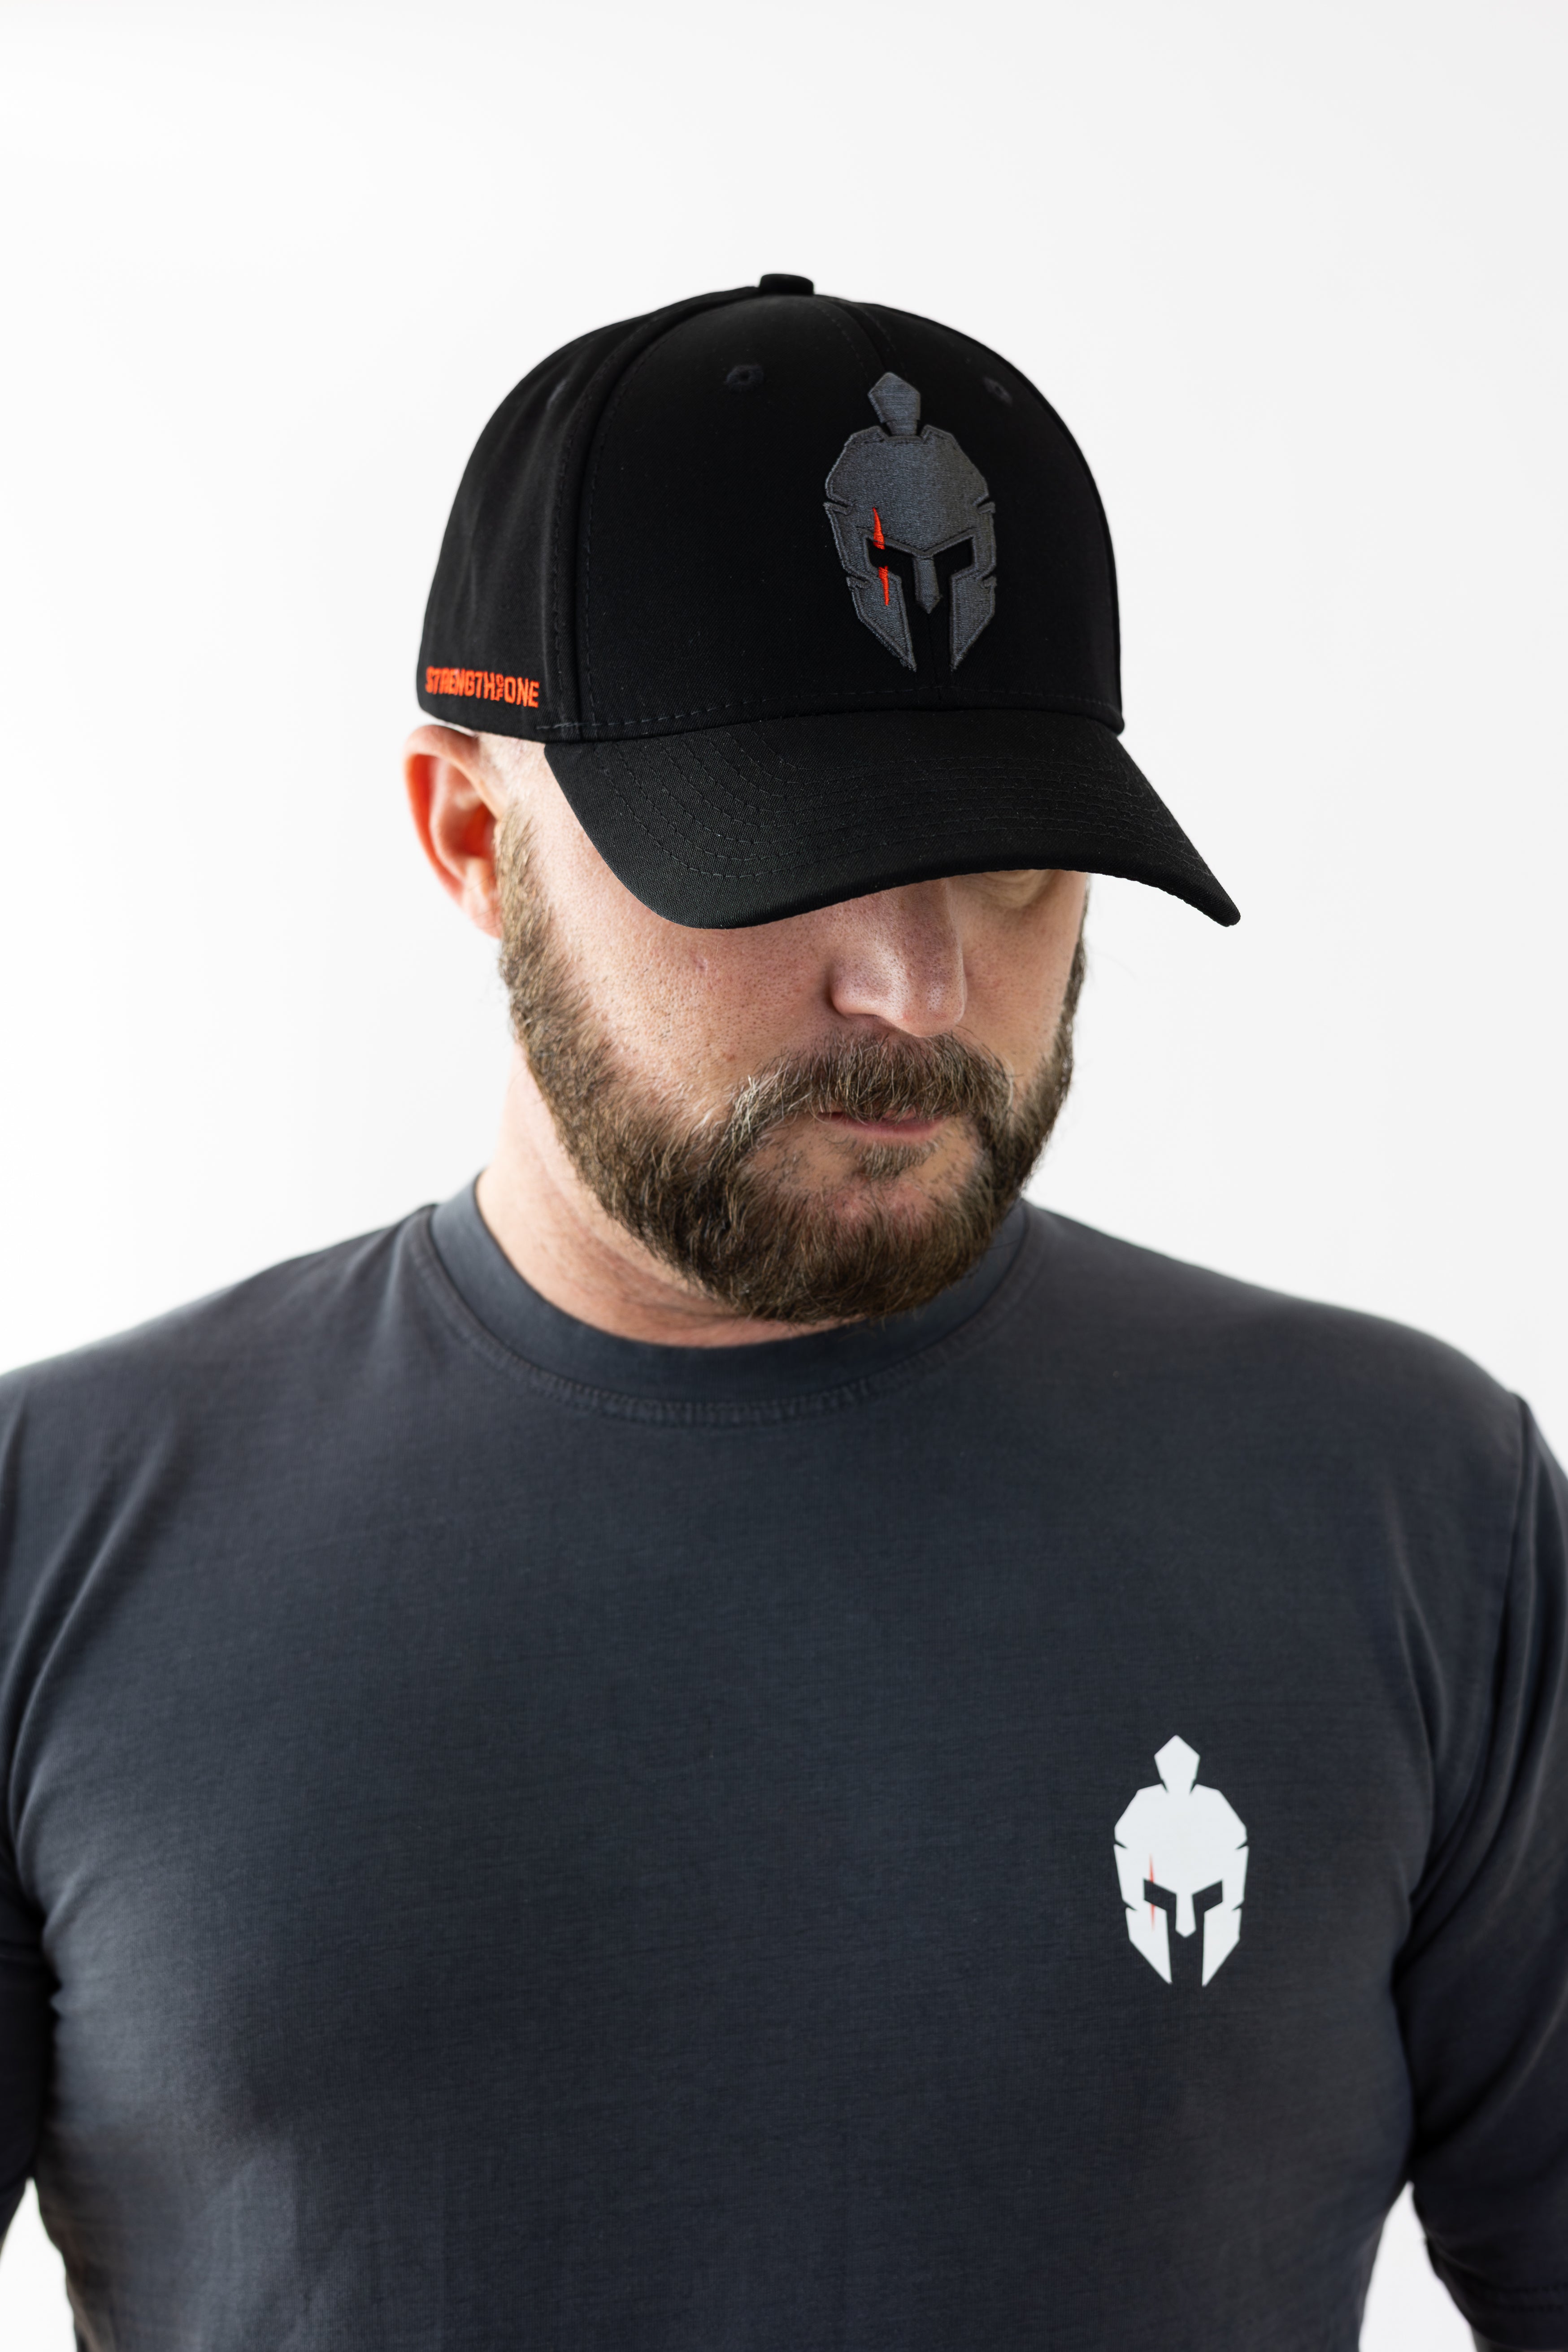 Man wearing a black Strength of One cap and t-shirt with matching spartan warrior logos.